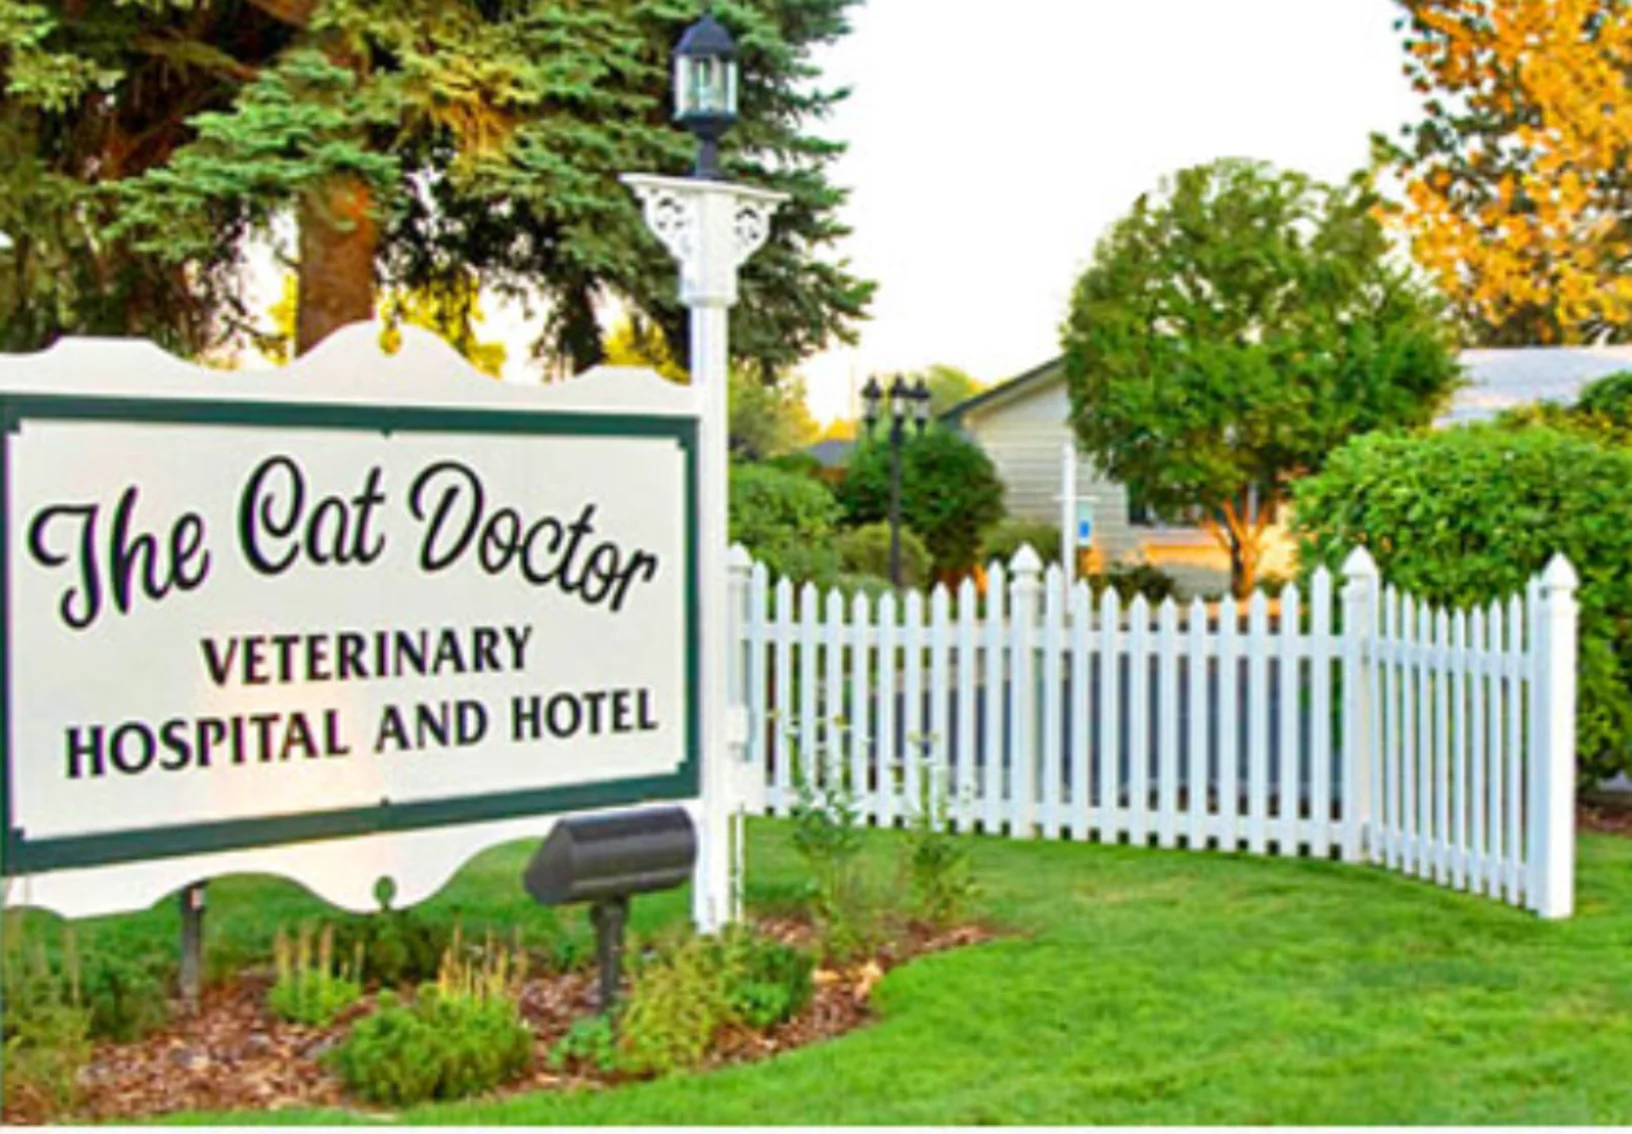 The Cat Doctor sign and building